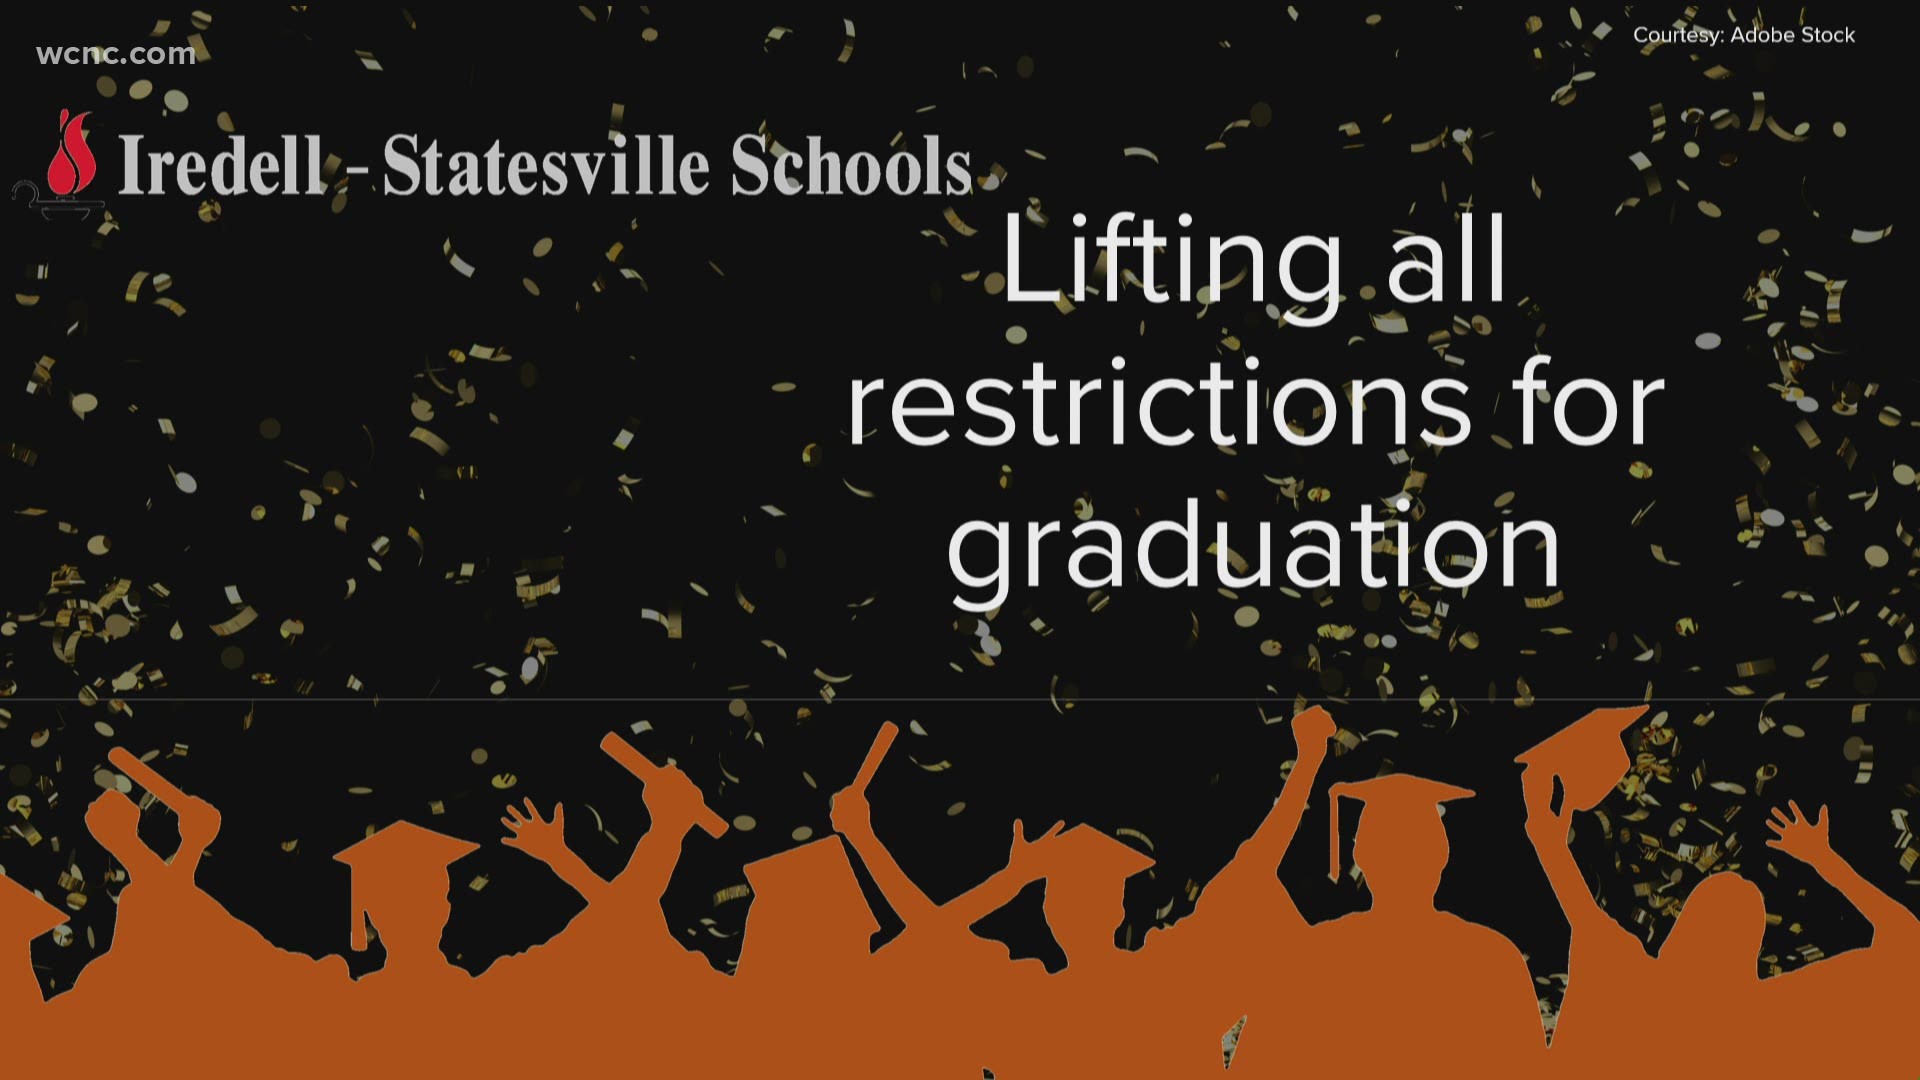 Two local districts in the Charlotte area have changed their capacity limits for upcoming graduation ceremonies.